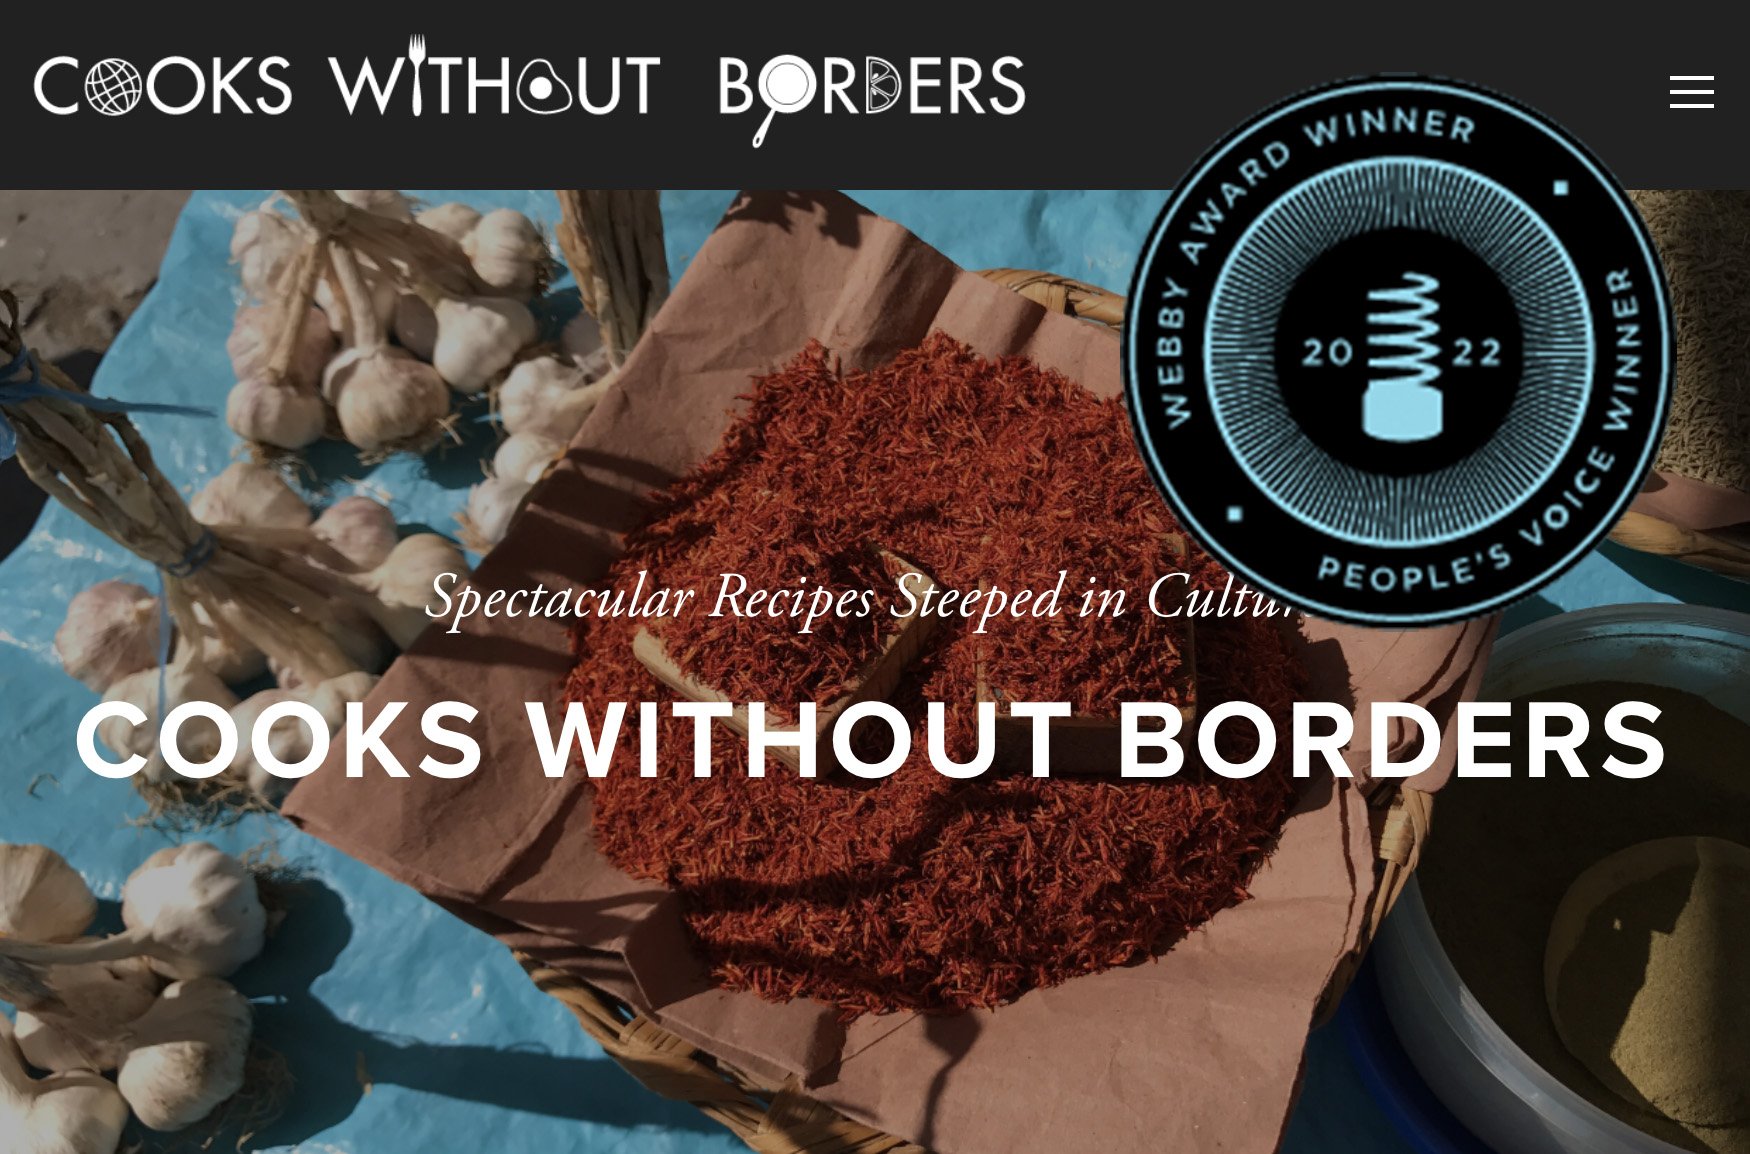 Cooks Without Borders wins a Webby Award, the 'Internet's highest honor'